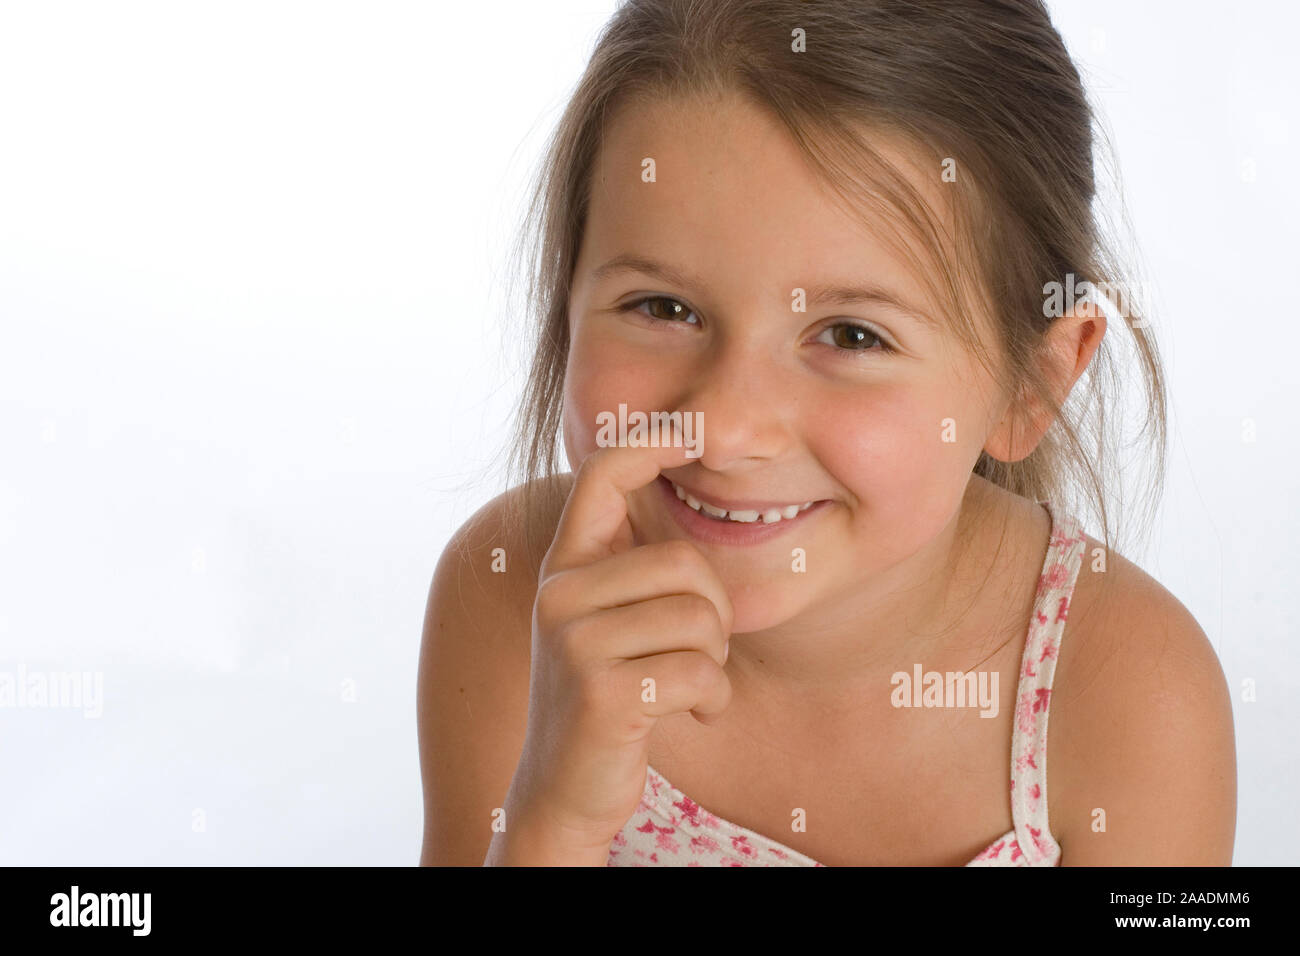 Nase Bohren High Resolution Stock Photography and Images - Alamy